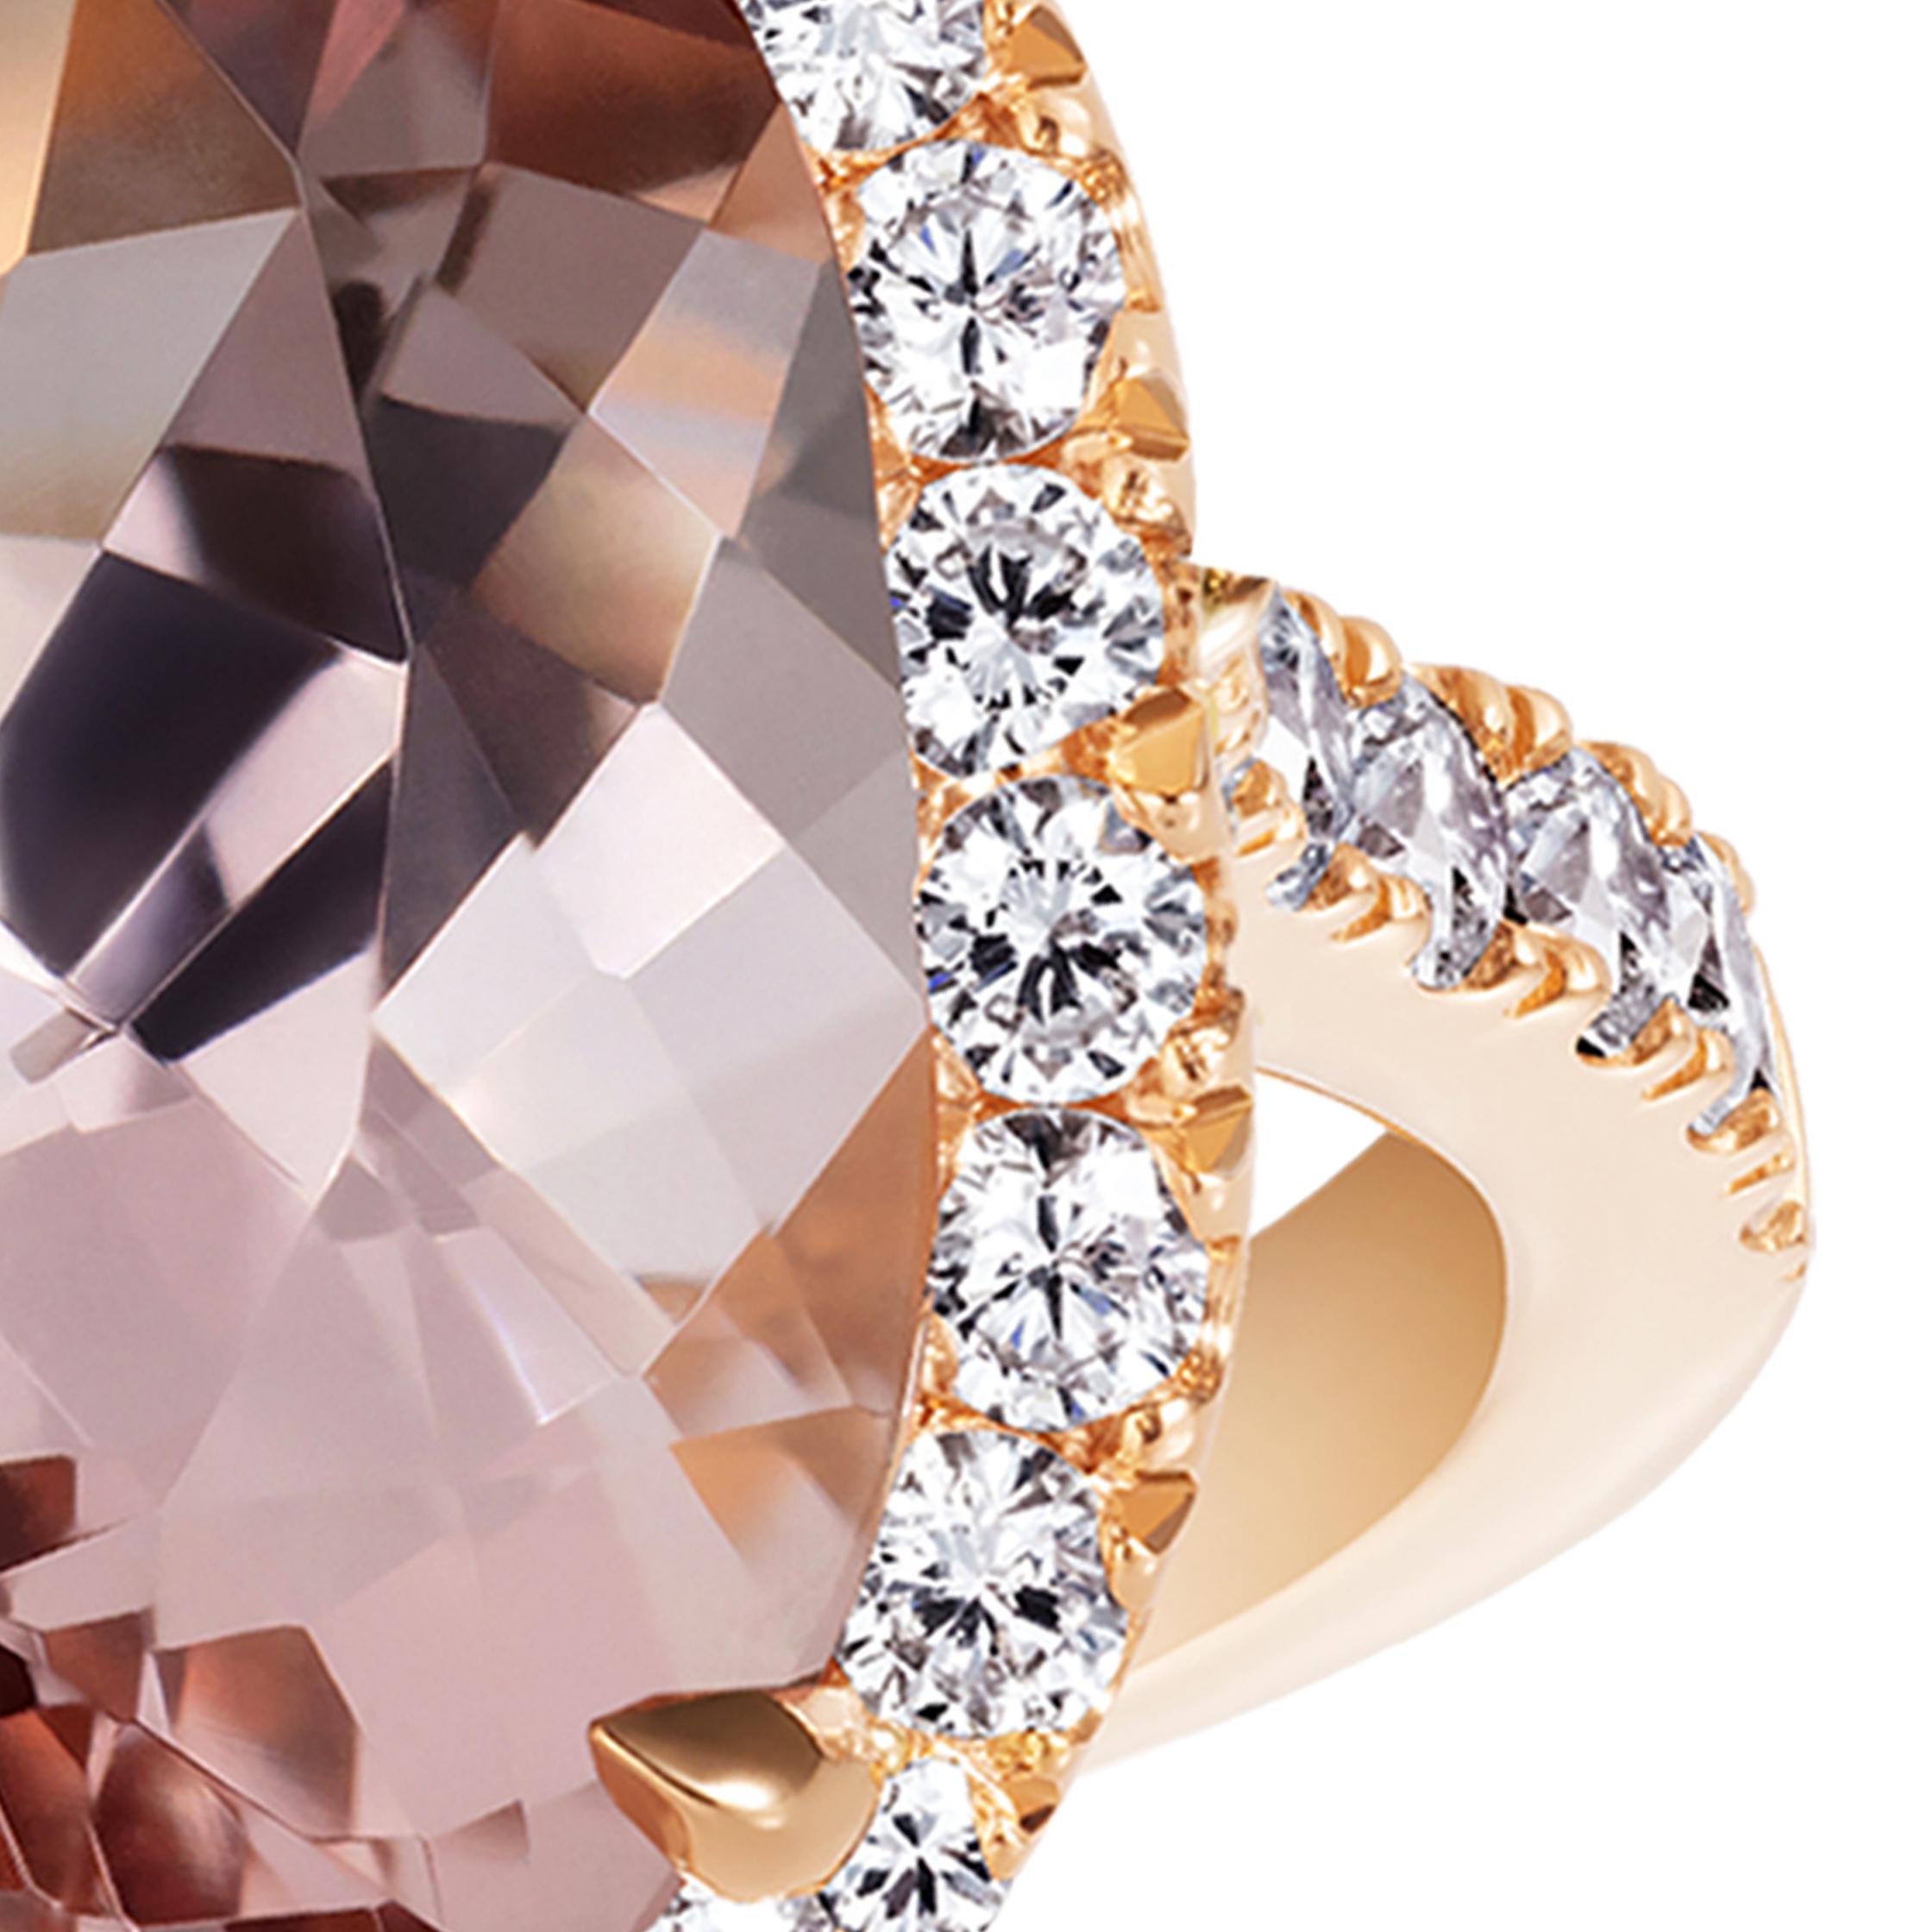 A beautiful 4 carat oval Morganite surrounded by diamonds. Set in the Hirsh 18K rose gold Regal setting.

- 4.02 carat oval Morganite
- Brilliant cut diamonds totalling approx. 0.64 carats
- Created in 18K rose gold, handmade in London

This ring is